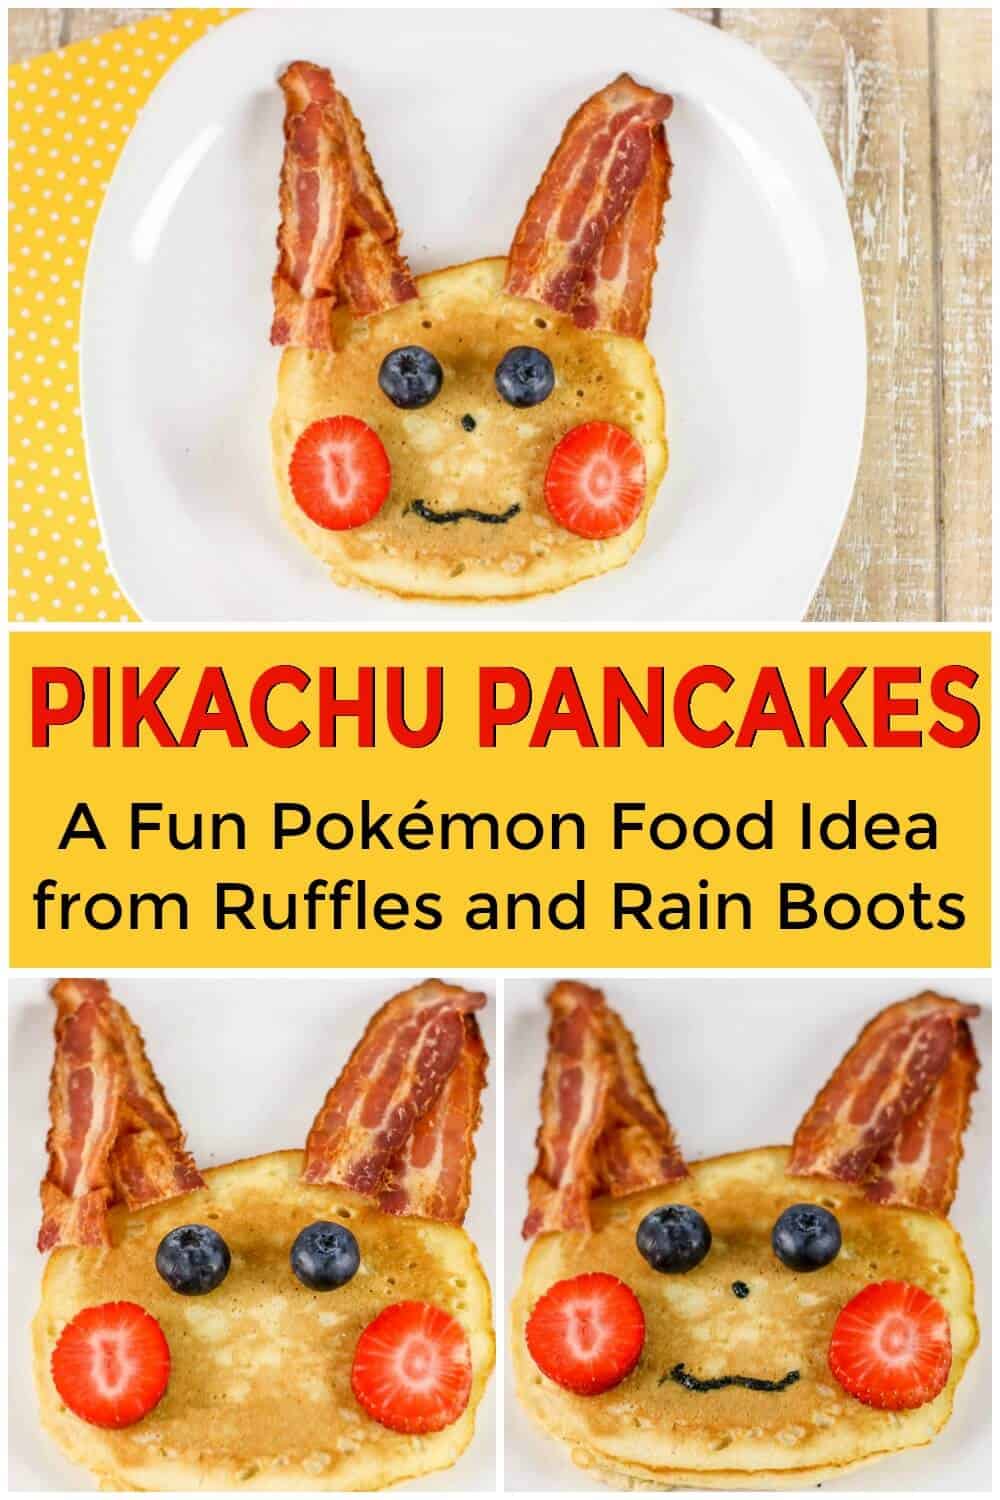 photo collage of pikachu pancakes with text which reads pikachu pancakes a fun pokemon food idea from Ruffles and Rain Boots